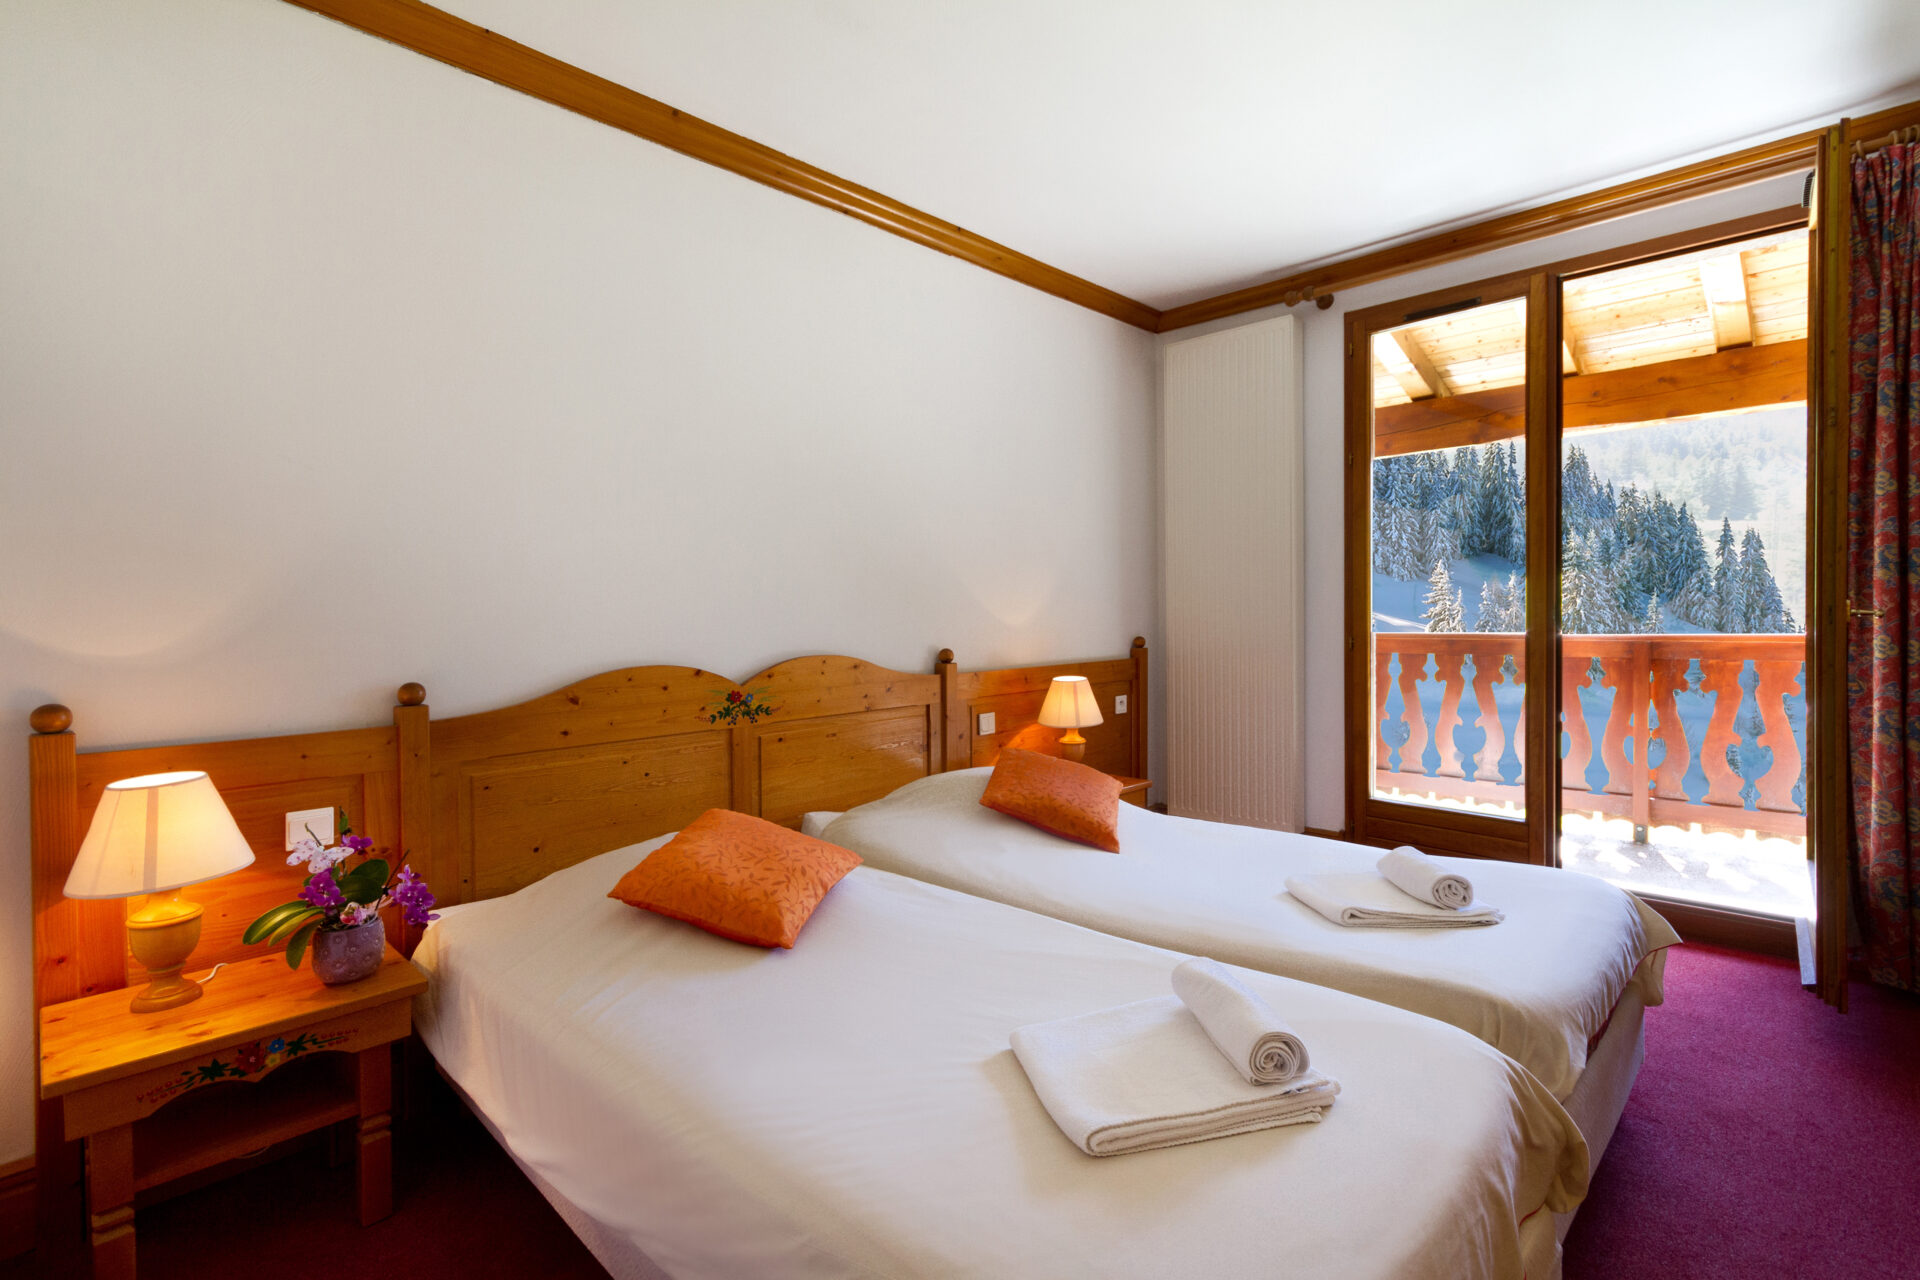 An image of one of the twin bedrooms at MMV Le Val Cenis